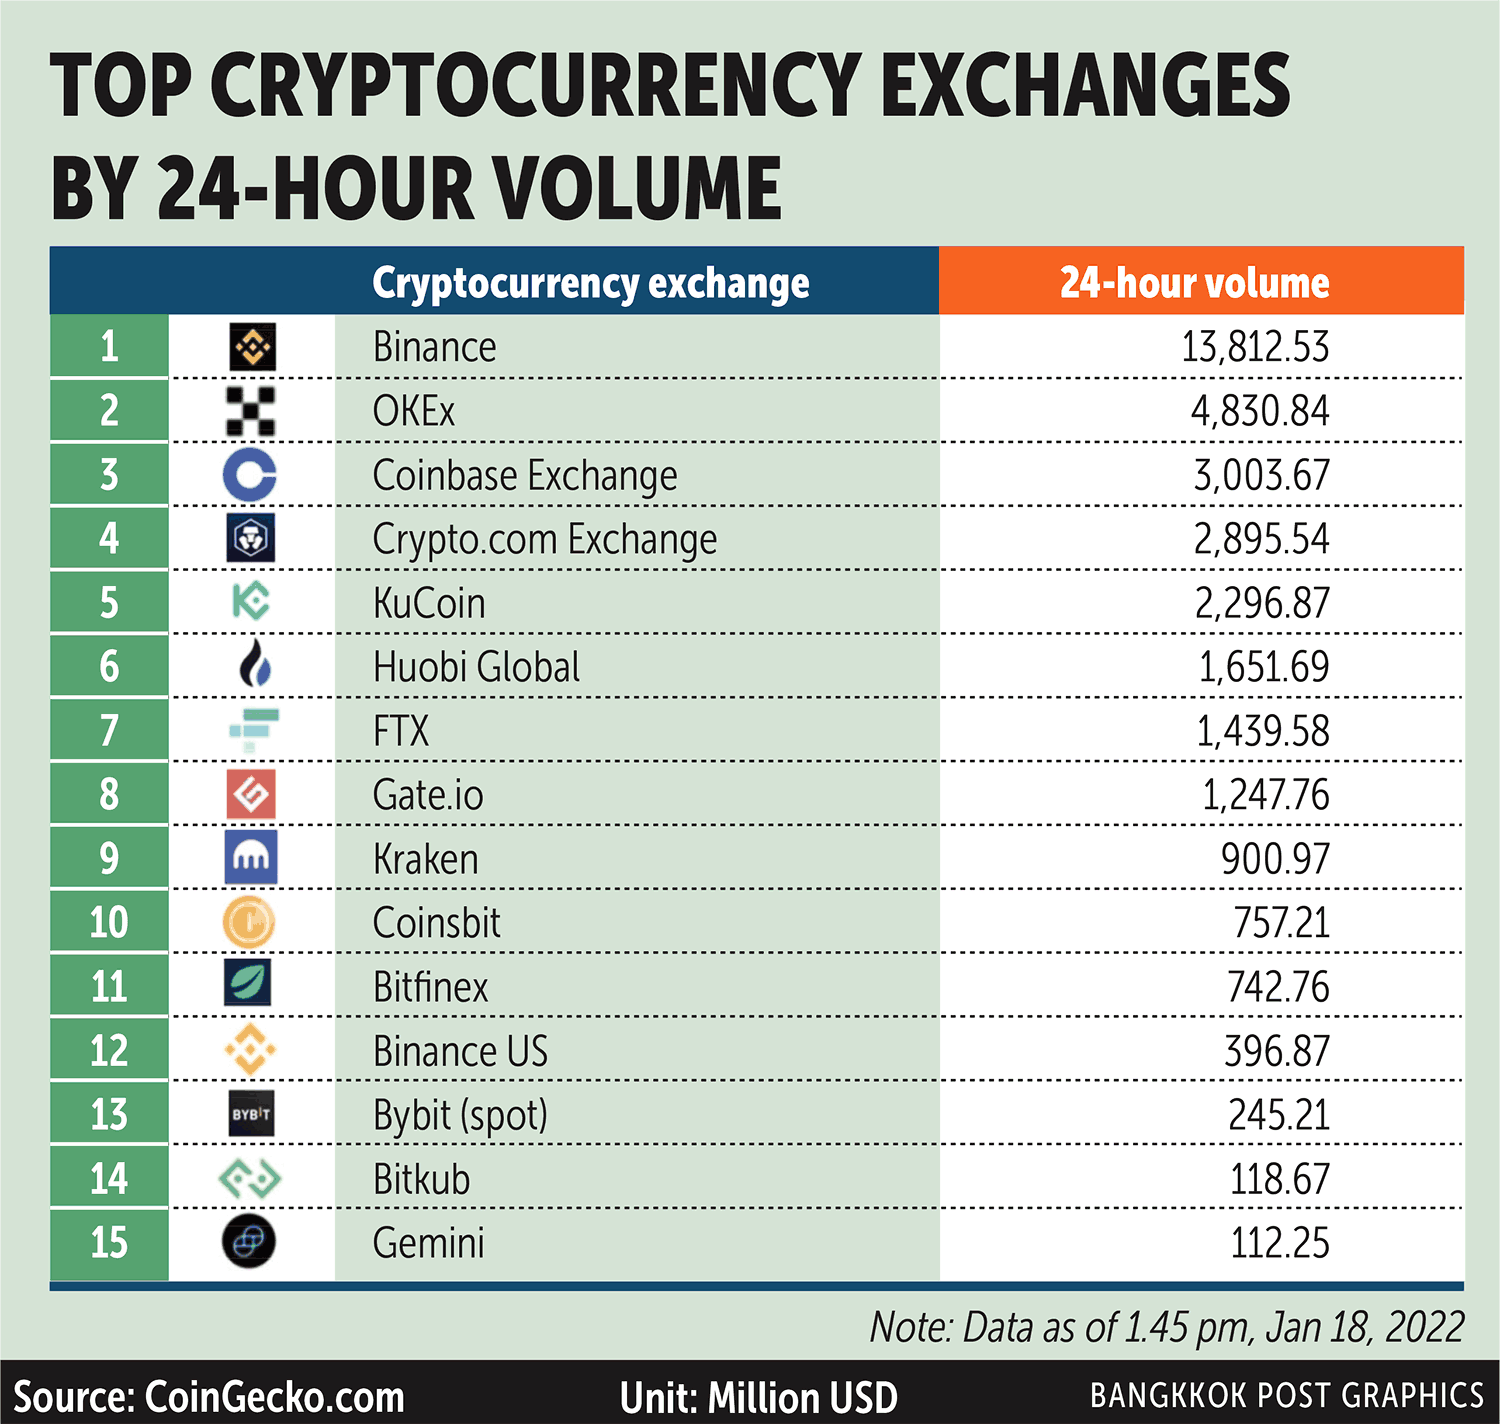 Asia bitcoin & crypto exchanges – 10 most visited cryptocurrency exchanges